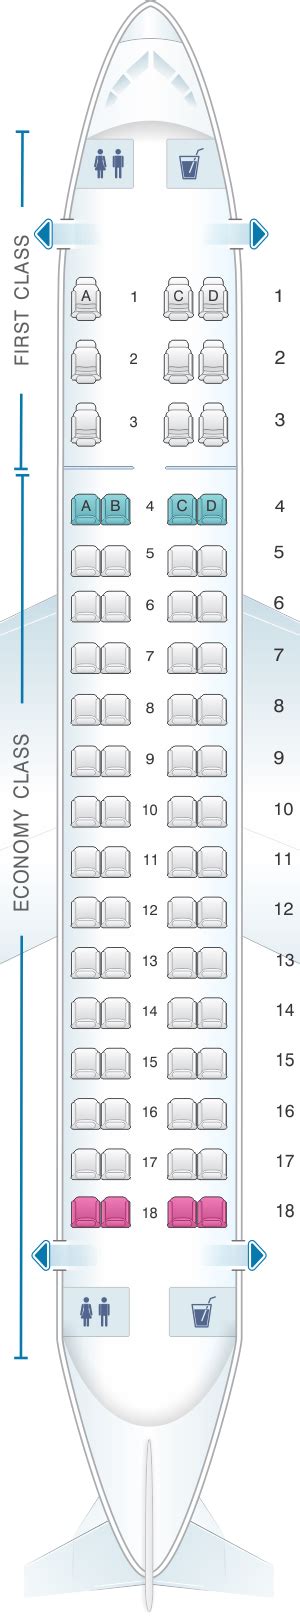 Seat Specs: First: Pitch 37, Width 19.9. Main Cabin Extra : Pitch 34, Width 18.2 - 19.3. Main Cabin: Pitch 30, Width 18.2 - 19.3. Guru Tips. The Embraer 175 is a small regional jet and is operated by Compass Airways and American Eagle on behalf of American Airlines. Key.. 